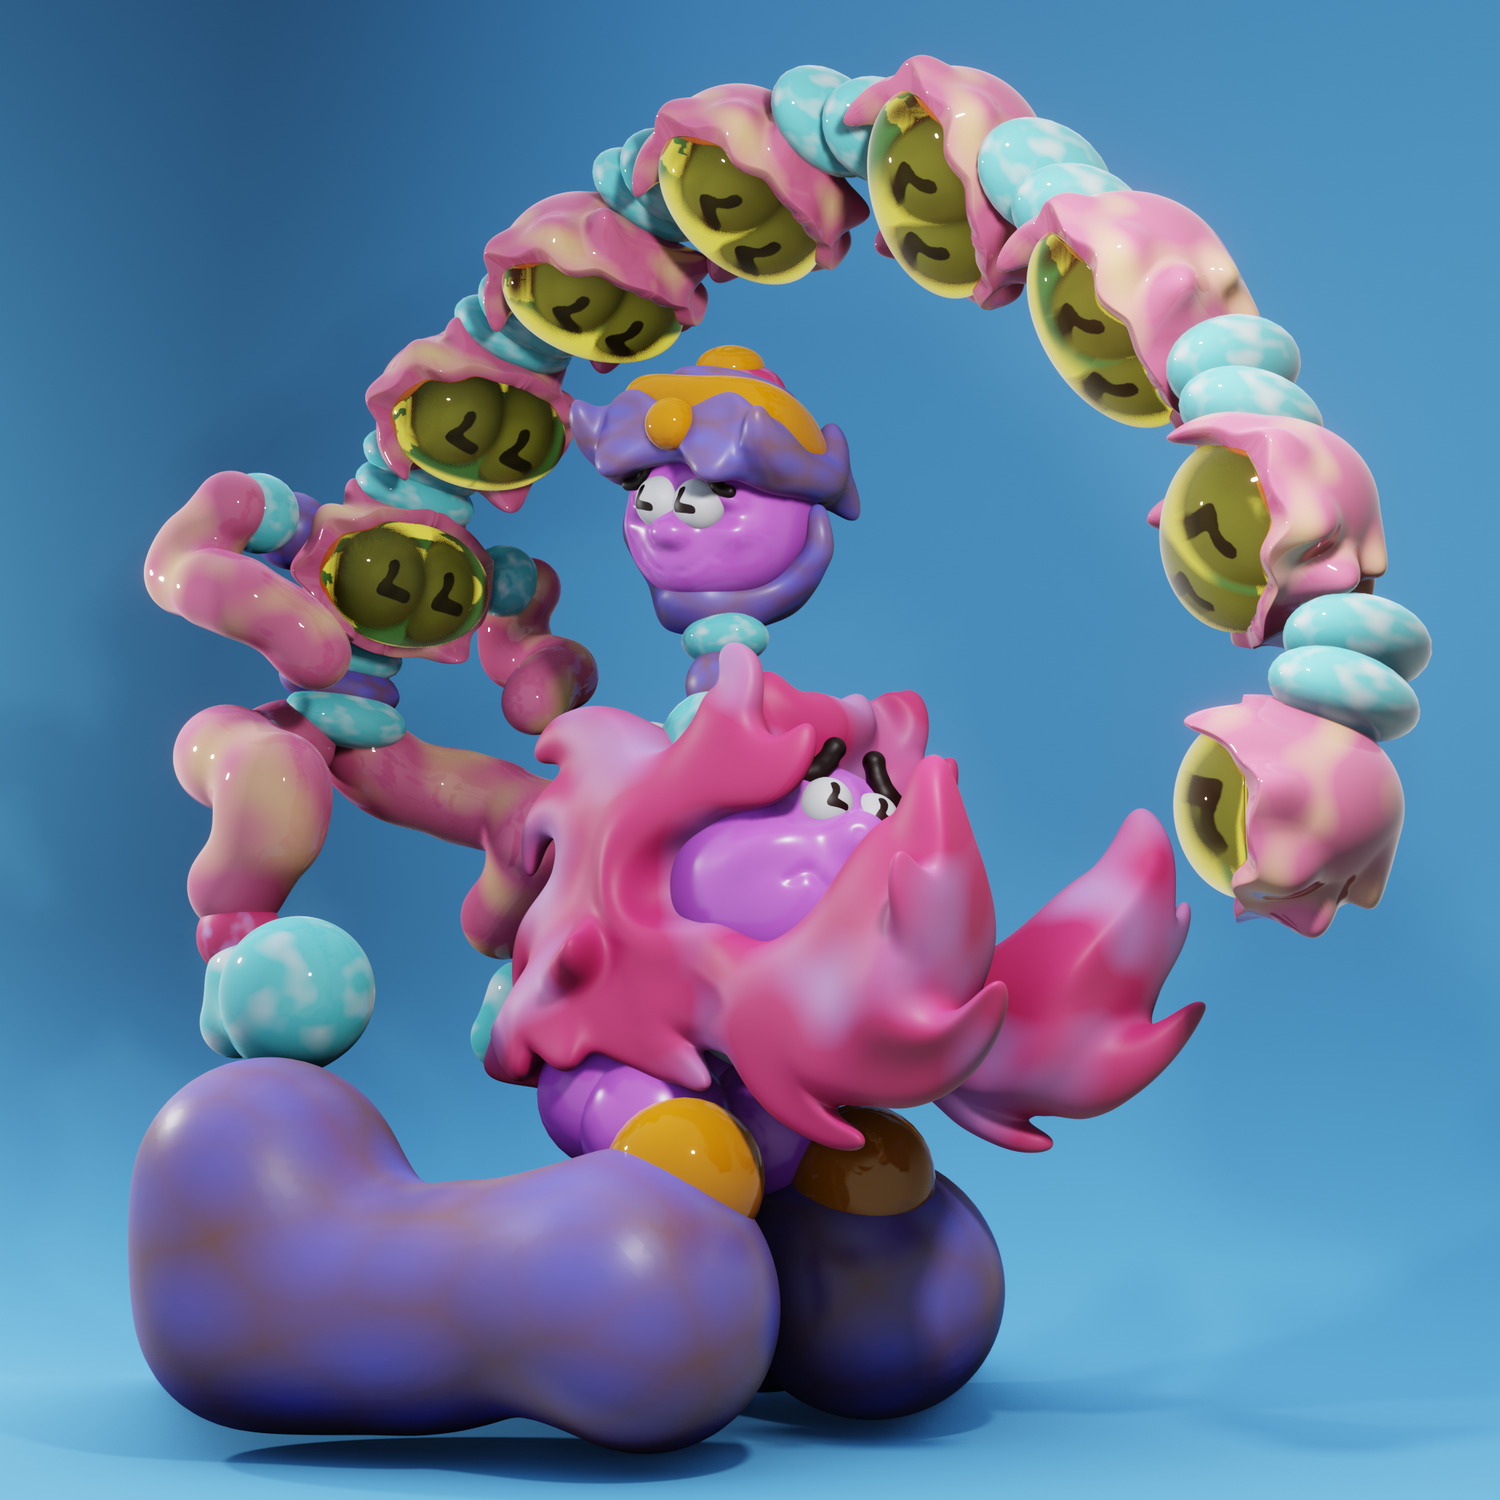 Sam Wood's absurd and colorful 3D world 1